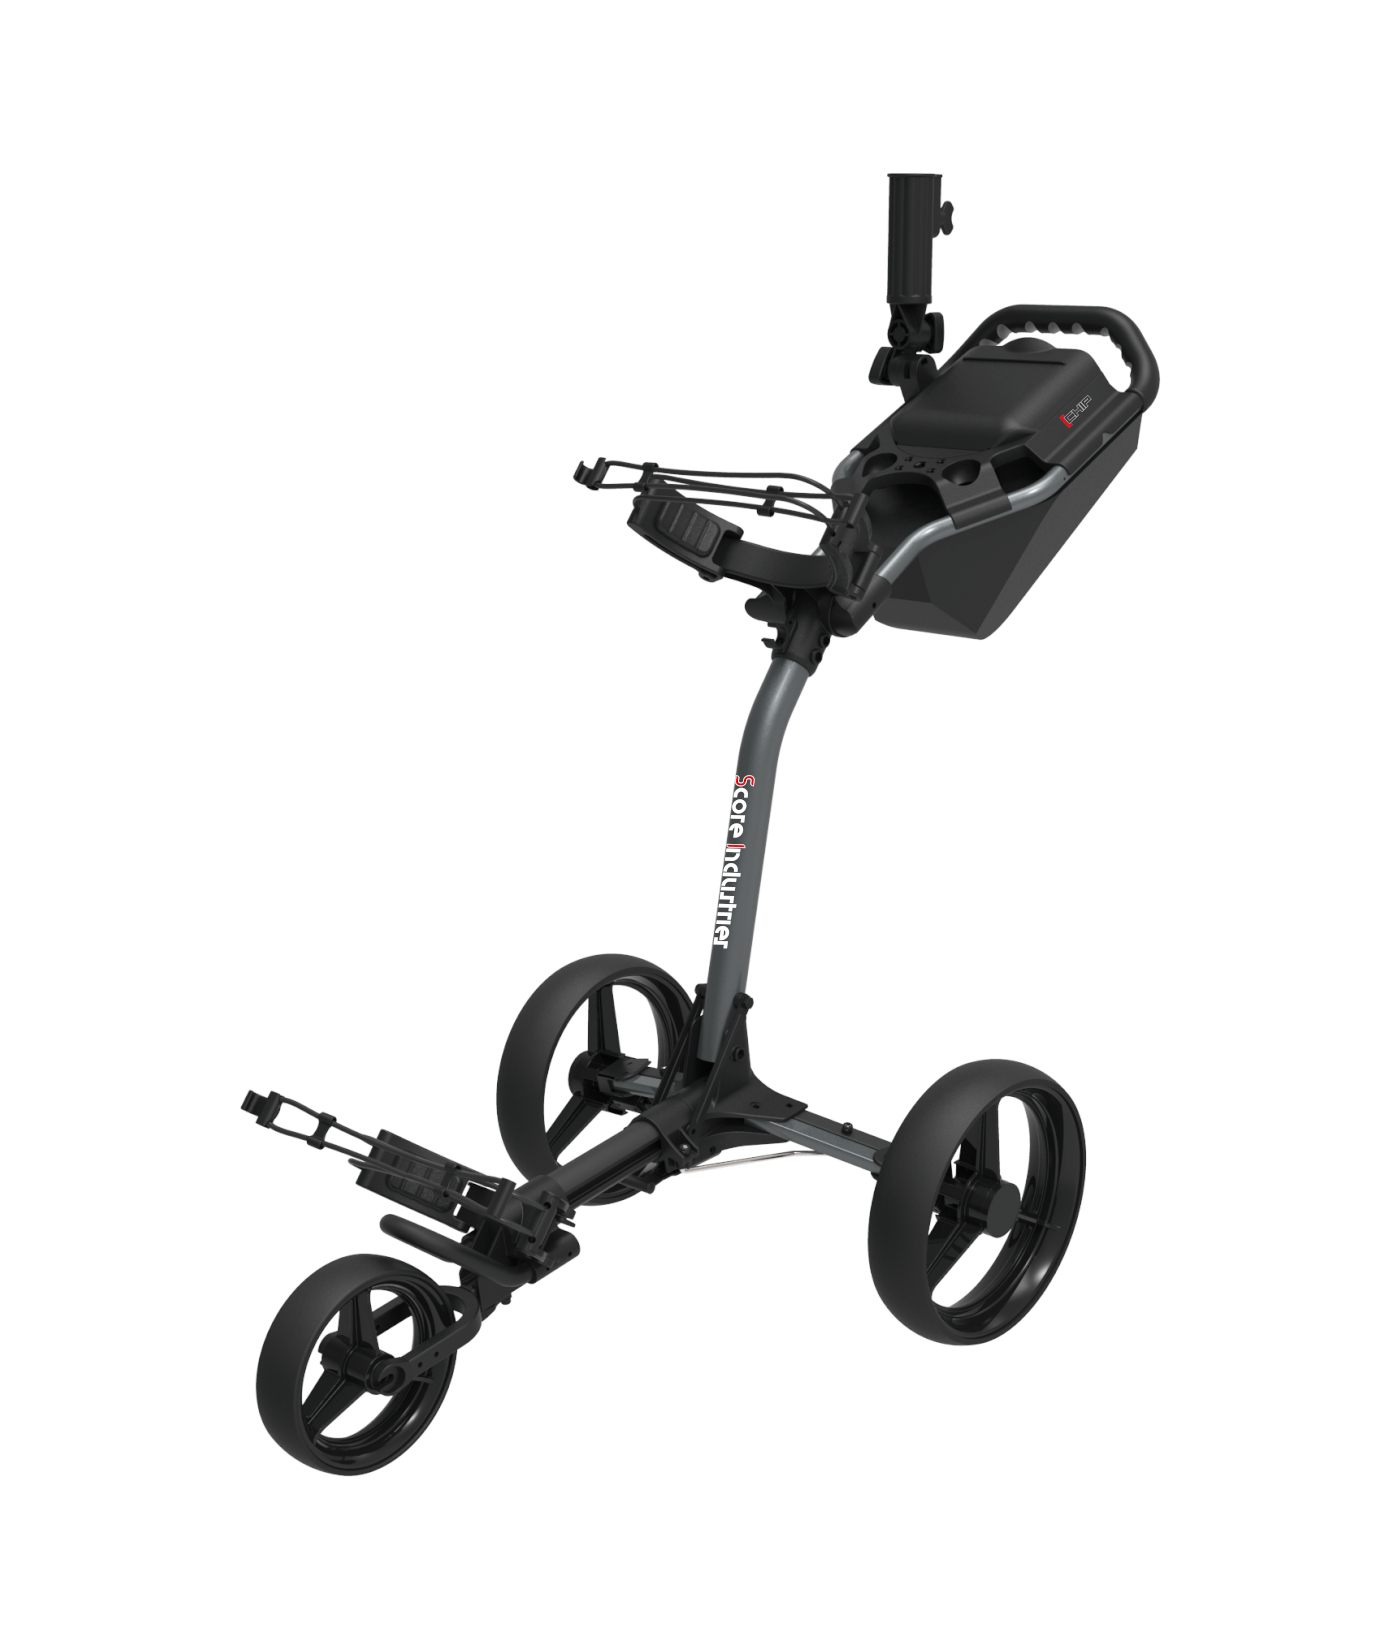 Score Industries Chip SW 8500 Charcoal/Black Trolley